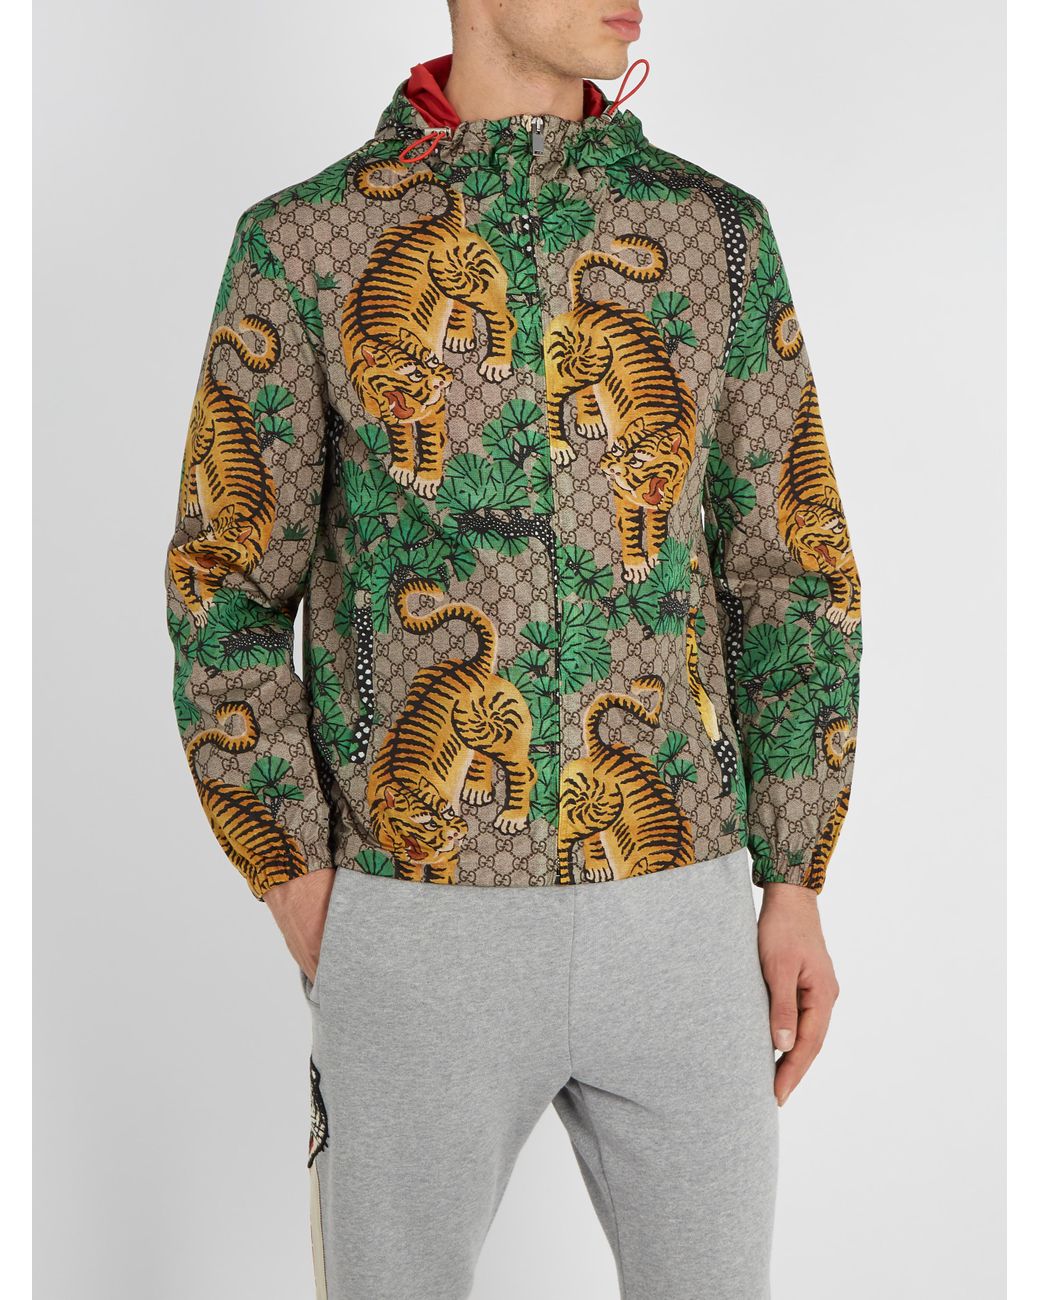 Gucci Bengal Tiger Print Jacket in Green for Men | Lyst Australia